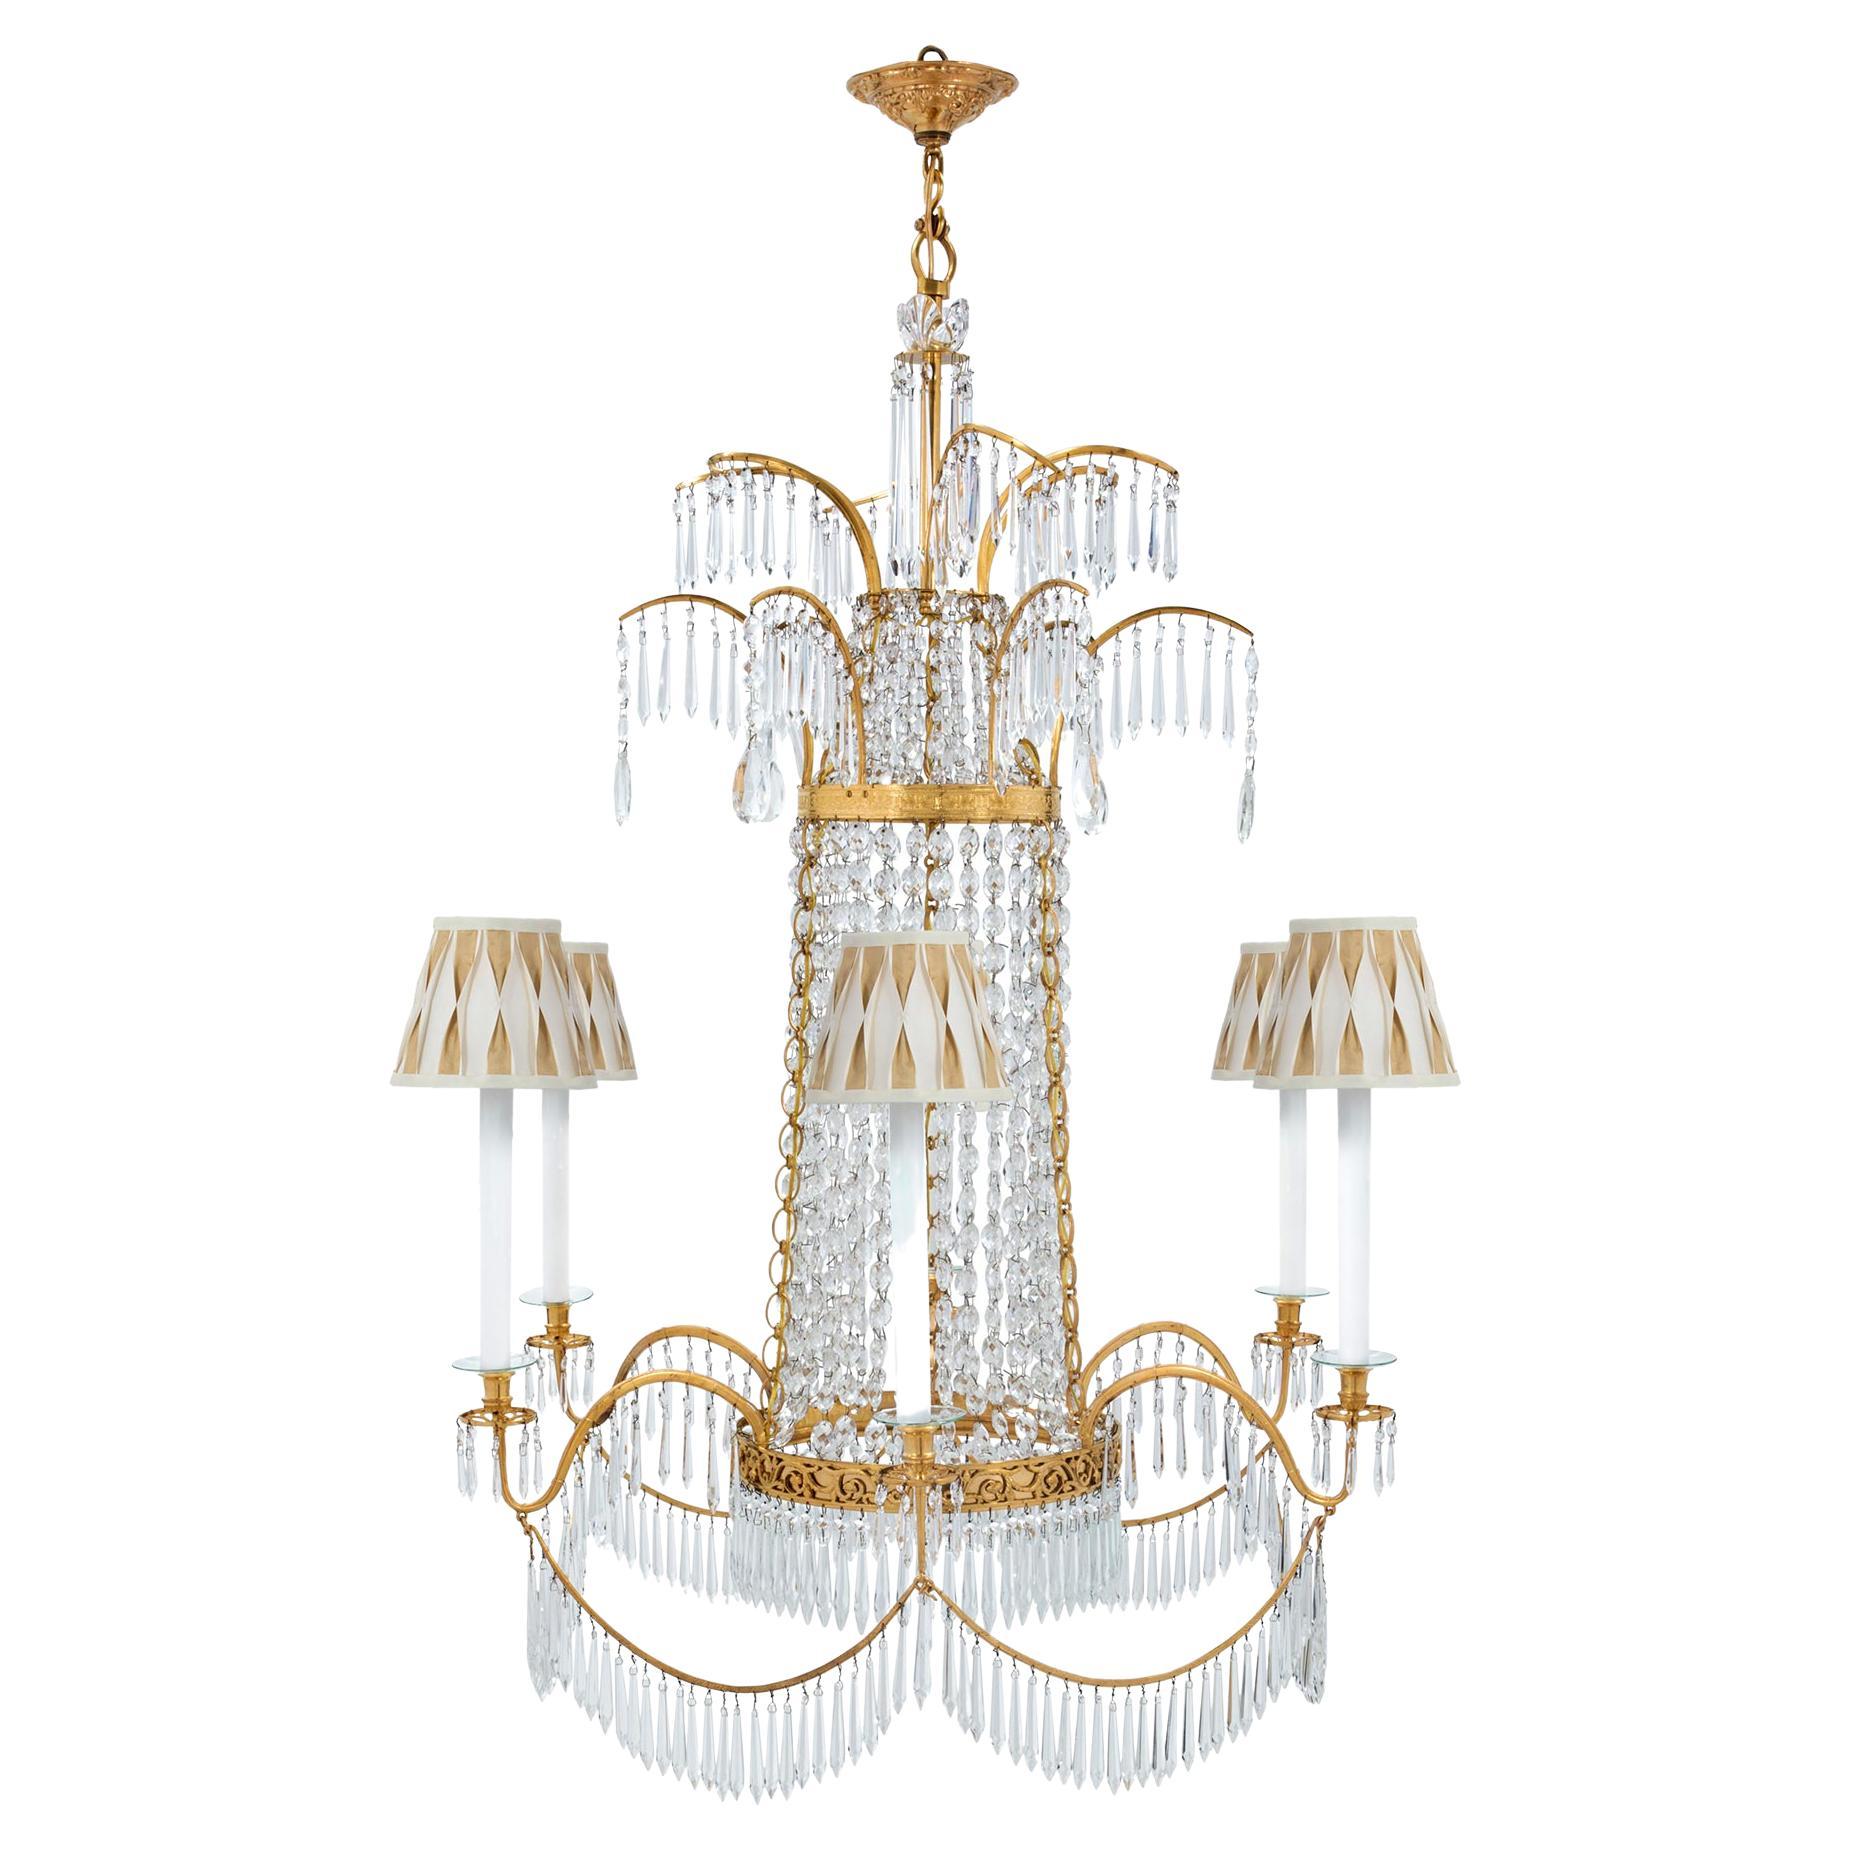 Russian 19th Century Neoclassical Ormolu and Crystal Six-Light Chandelier